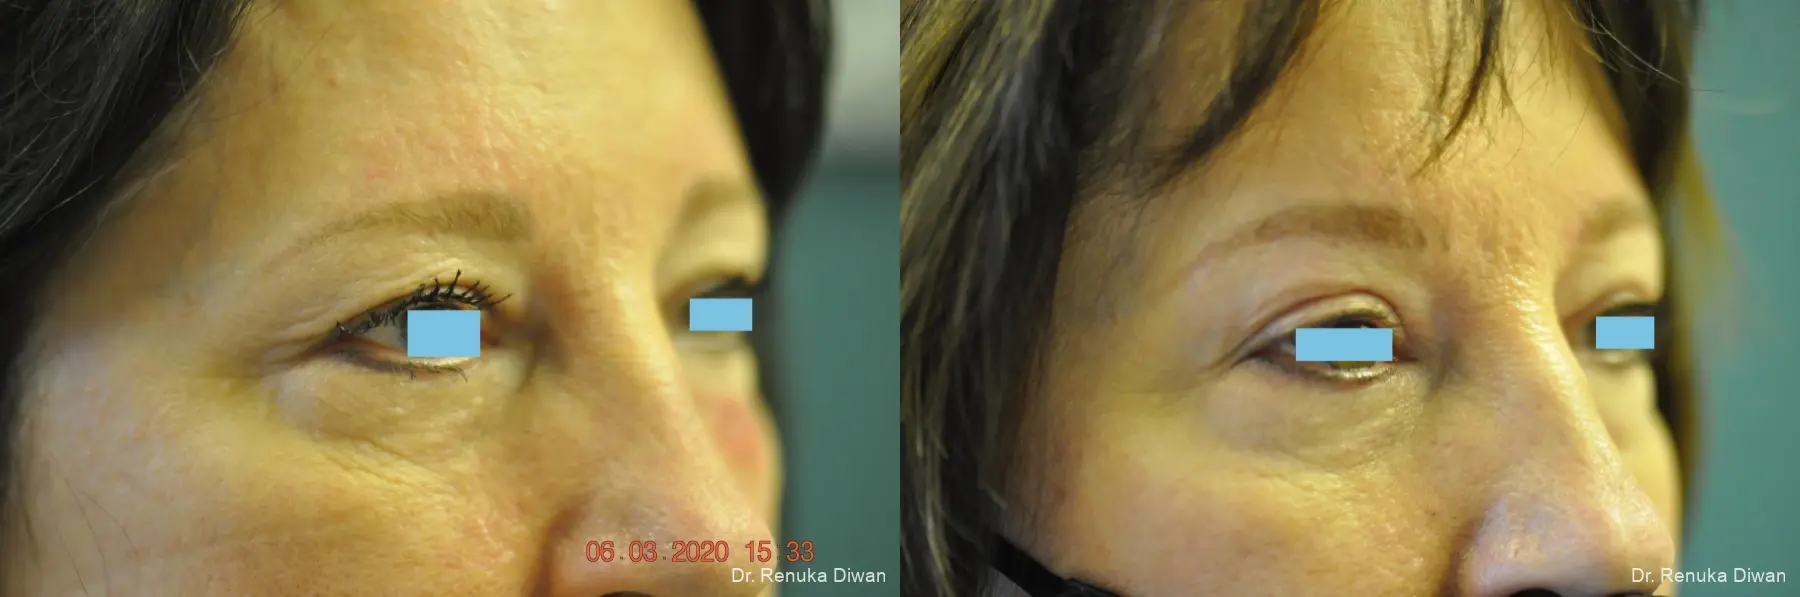 Blepharoplasty: Patient 9 - Before and After 2